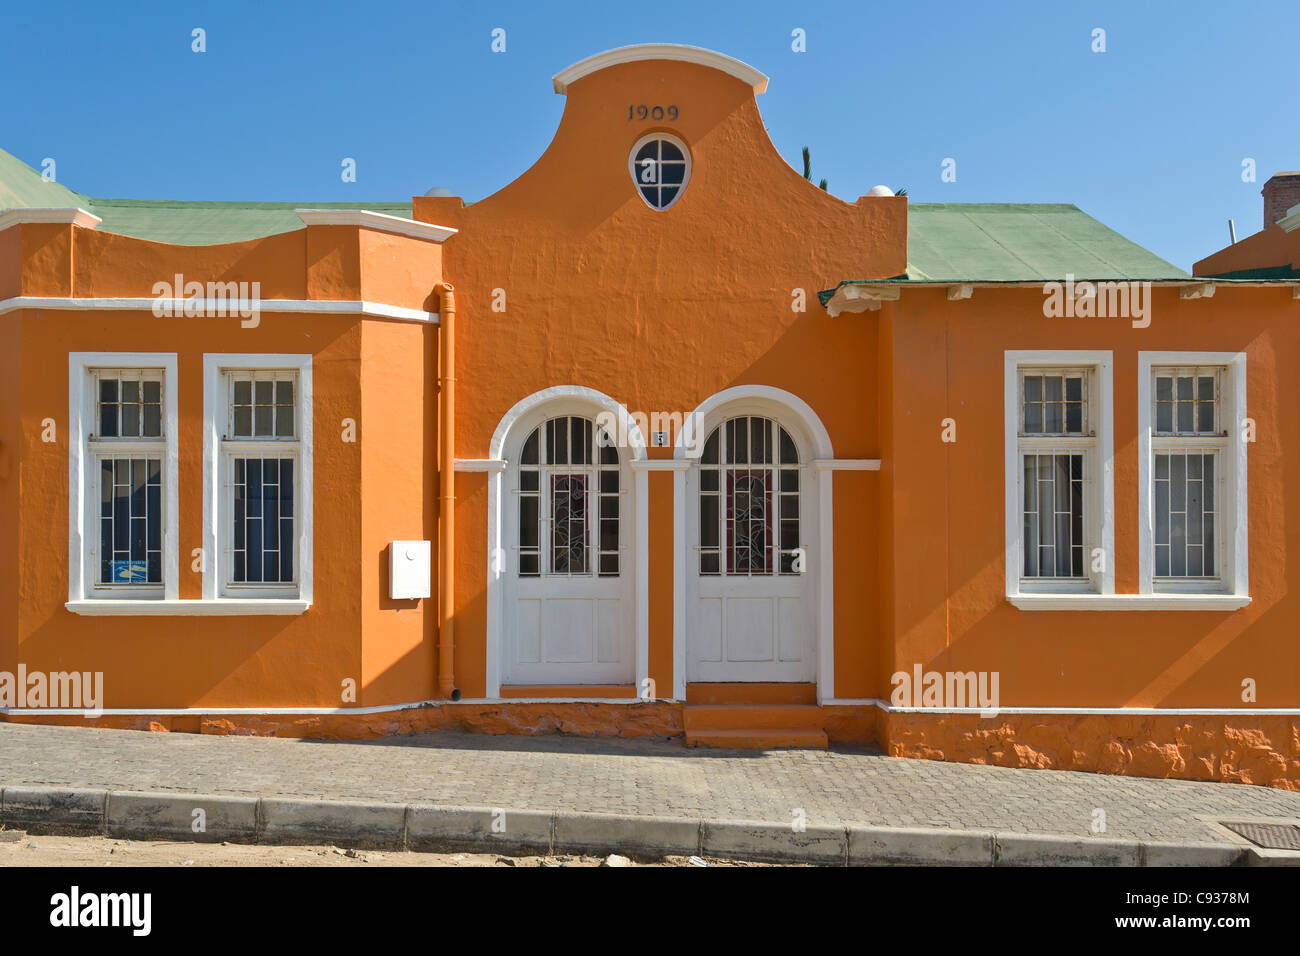 Historical building from 1909 in Luederitz Namibia Stock Photo